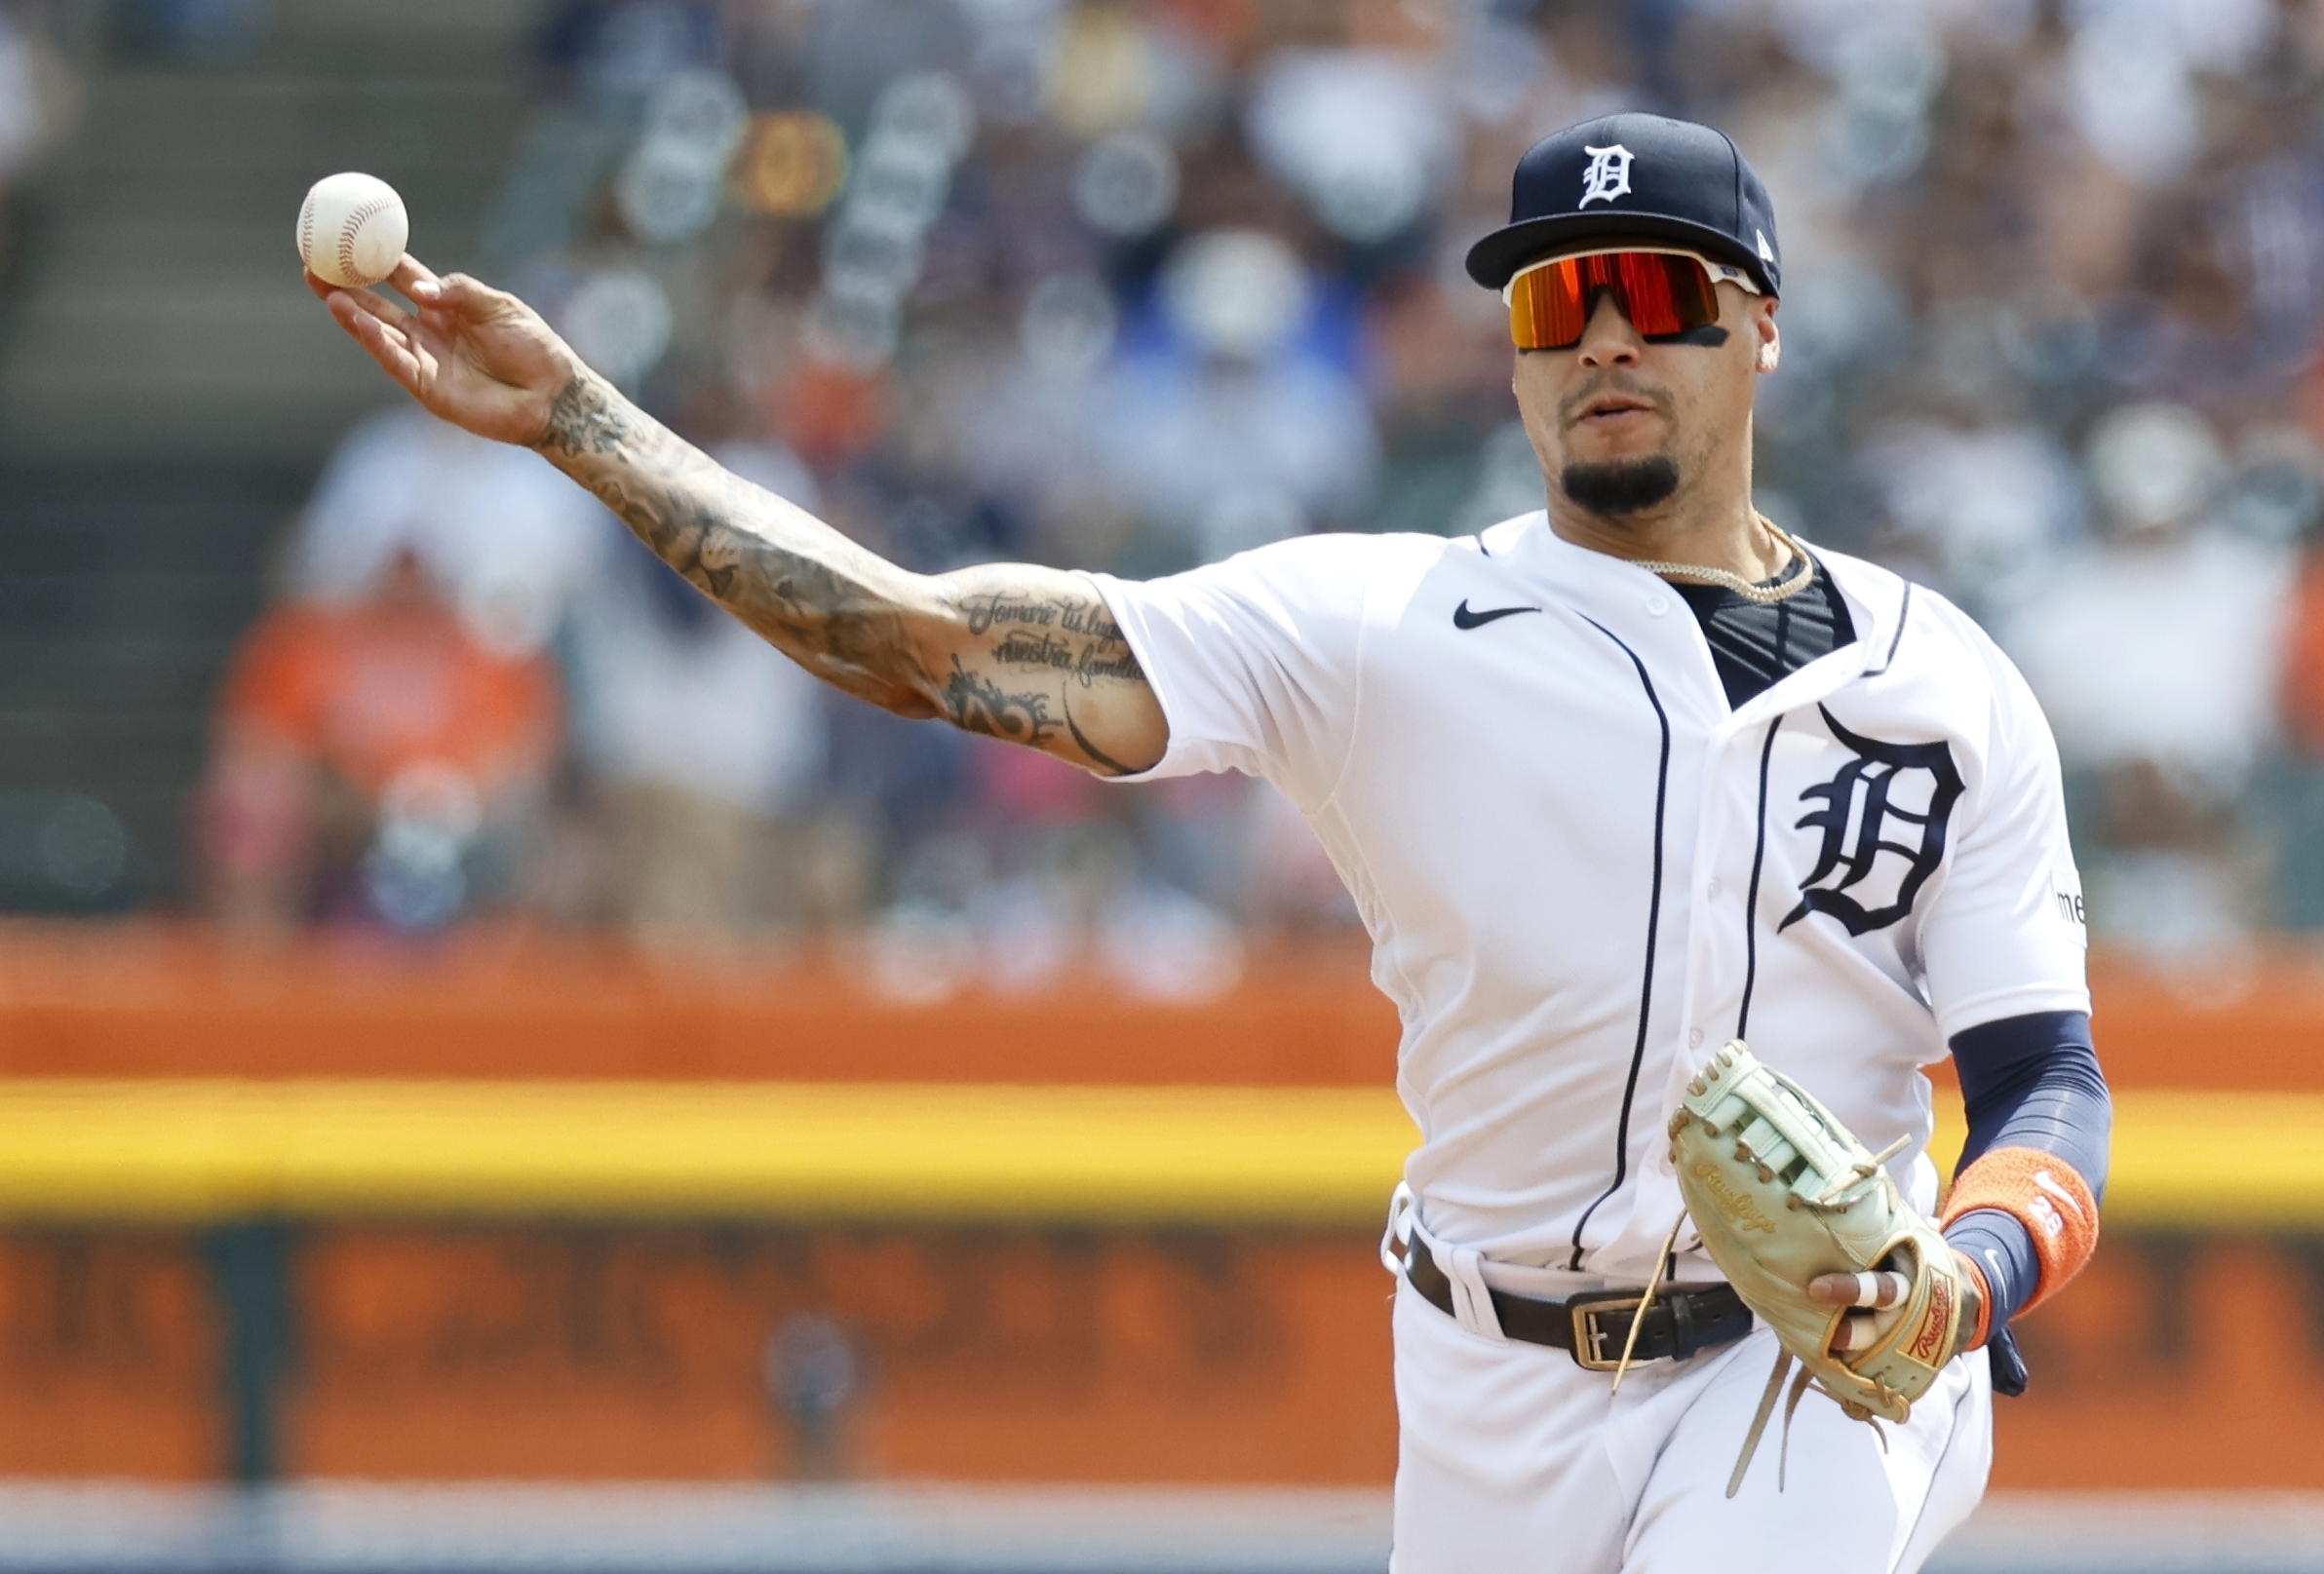 Tigers call up infielder from Toledo as Javier Baez goes on